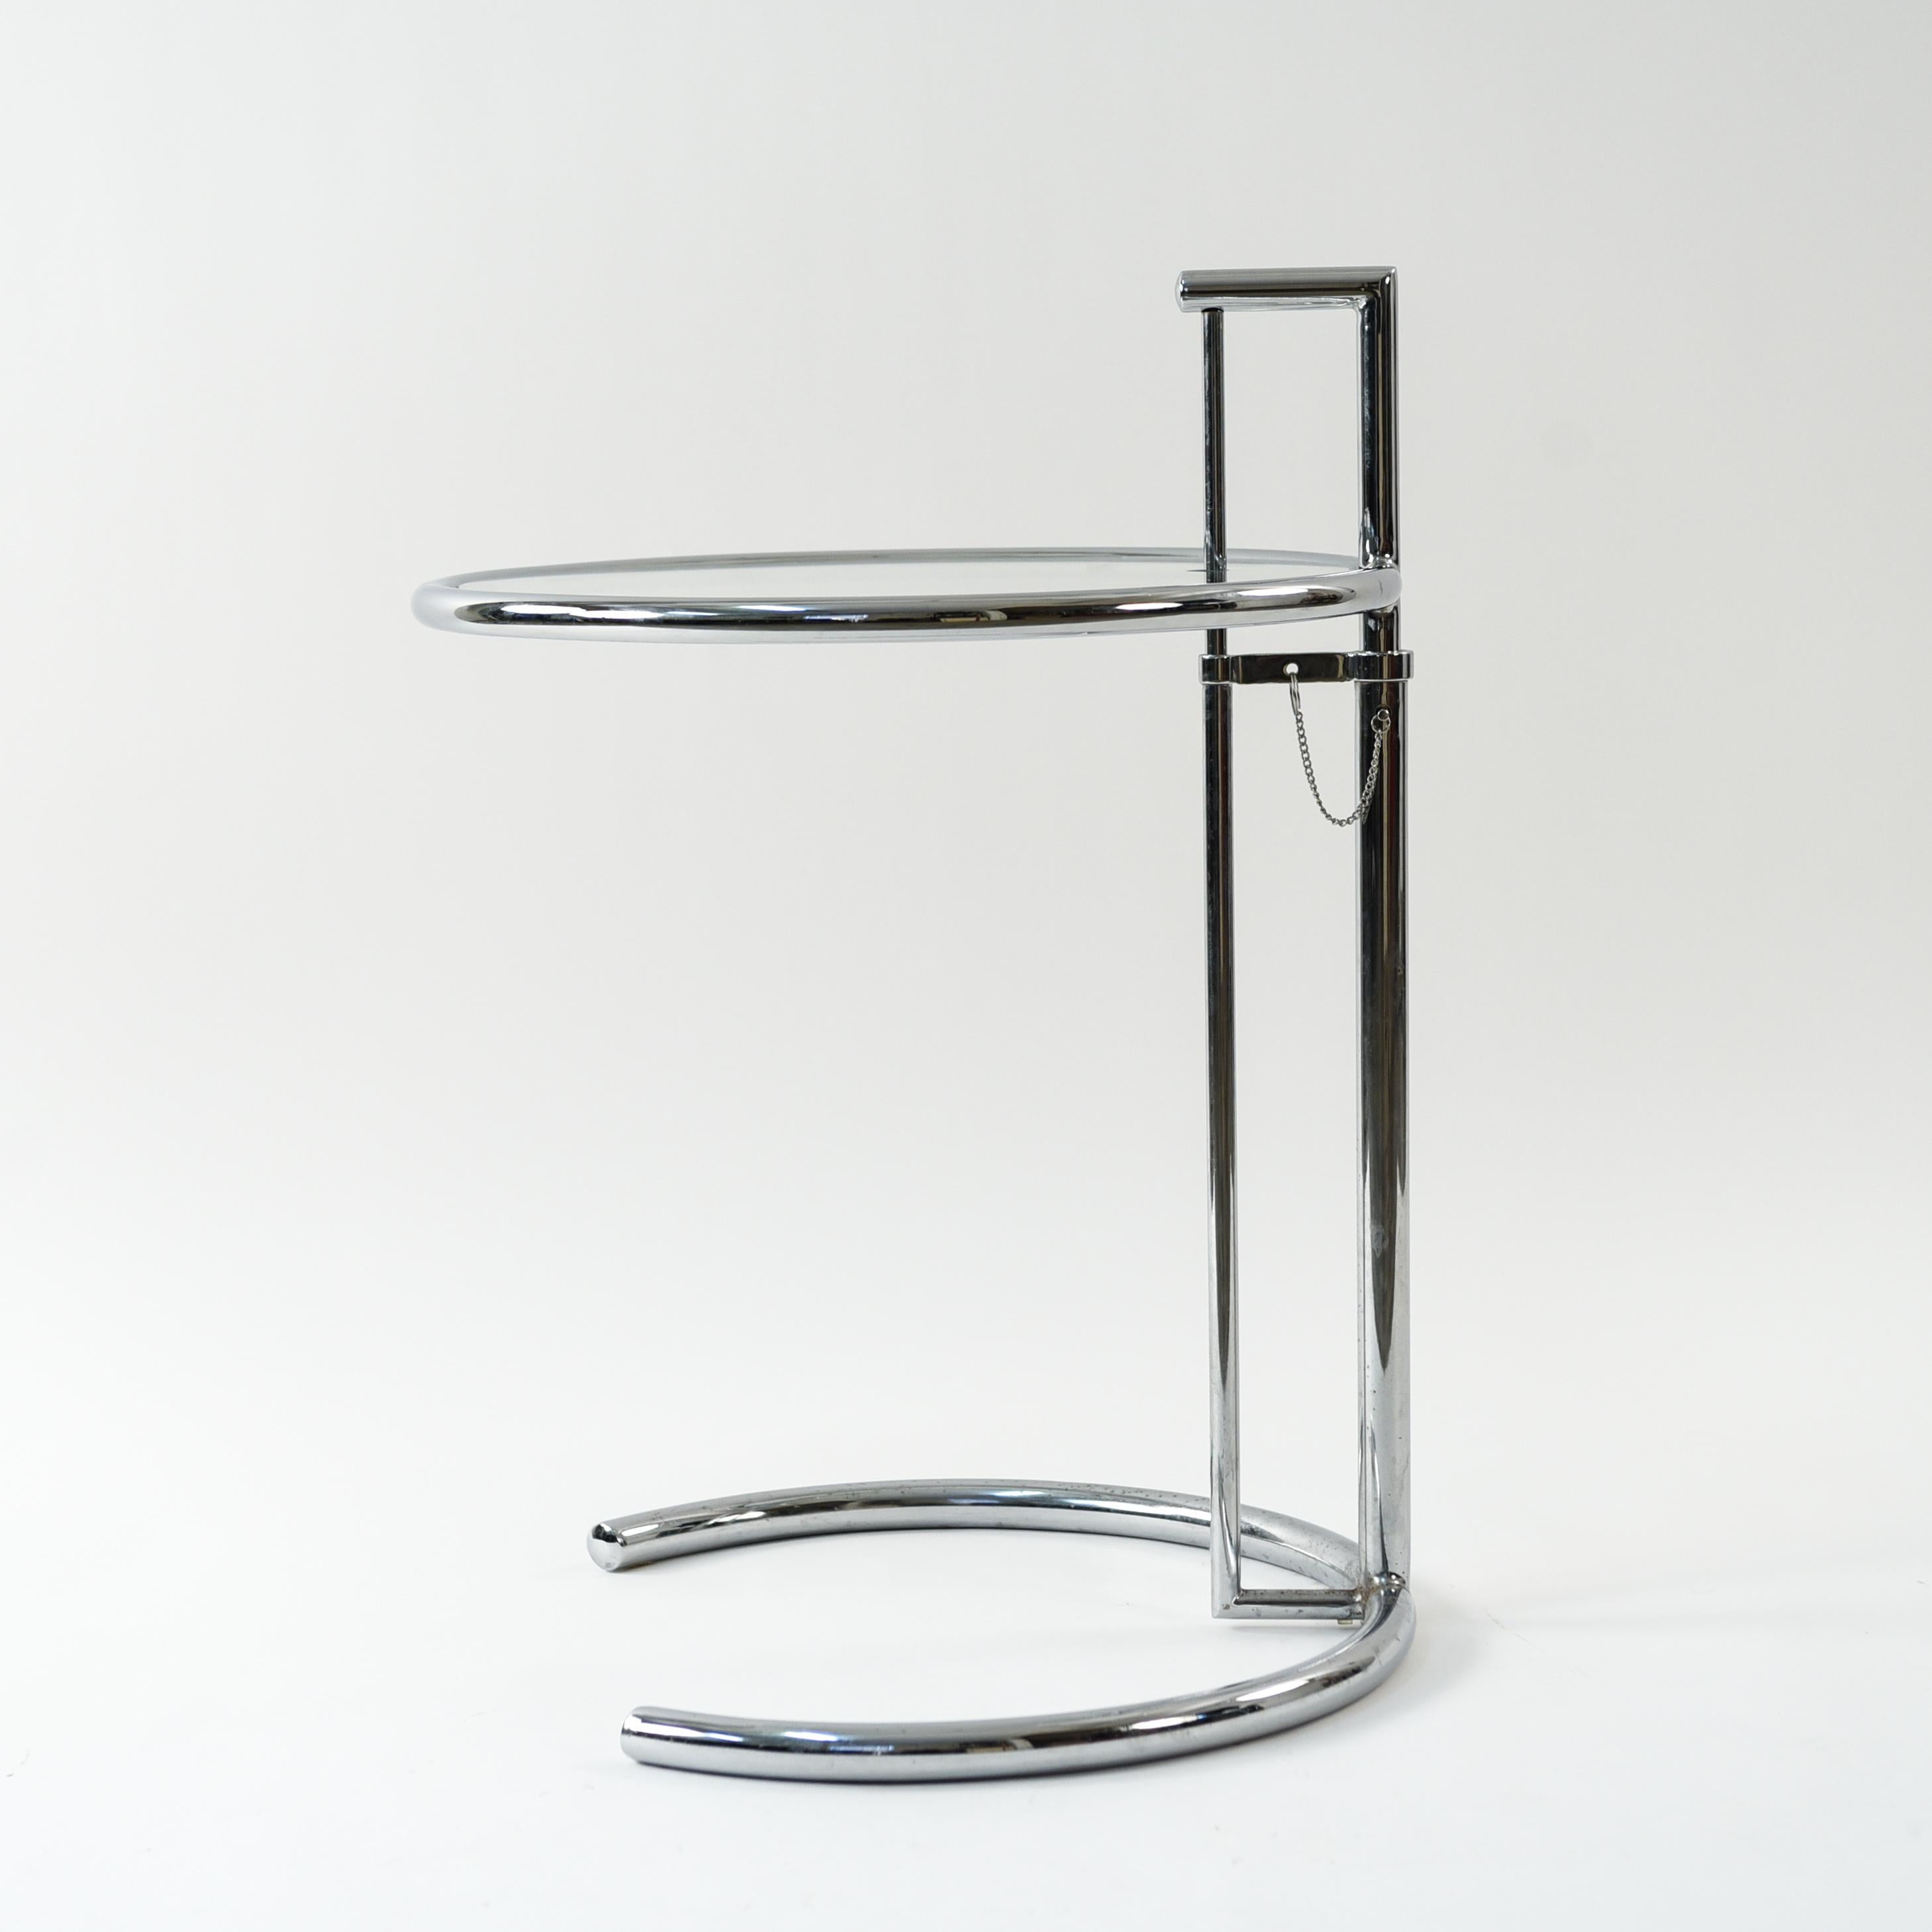 Model E1027 side table designed by Eileen Gray and produced in the 1970s. This piece features tubular chrome plated steel and a replaceable glass top with an iconic adjustable mechanism.